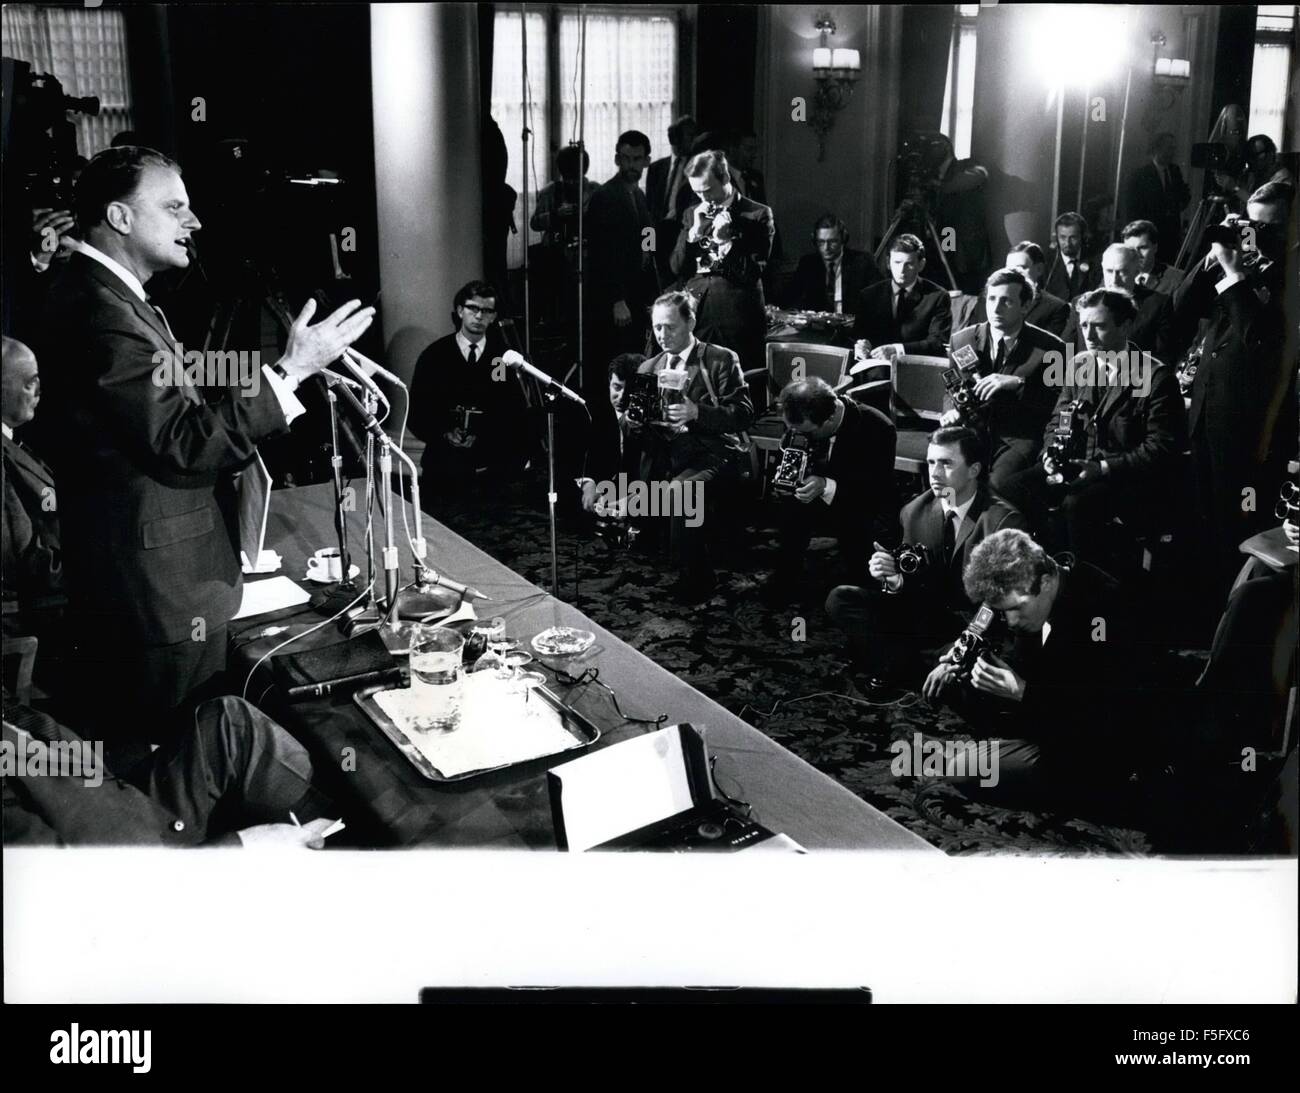 1972 - Billy Graham confronts British Pressman: The American Evangelist Belly Graham on his arrival in London gave a press conference at the Waldorf Hotel in which he outlined the main points of his forthcoming campaign. Photo shows Billy Graham facing a battery of pressman cooly, calmly and in tremendous form. © Keystone Pictures USA/ZUMAPRESS.com/Alamy Live News Stock Photo